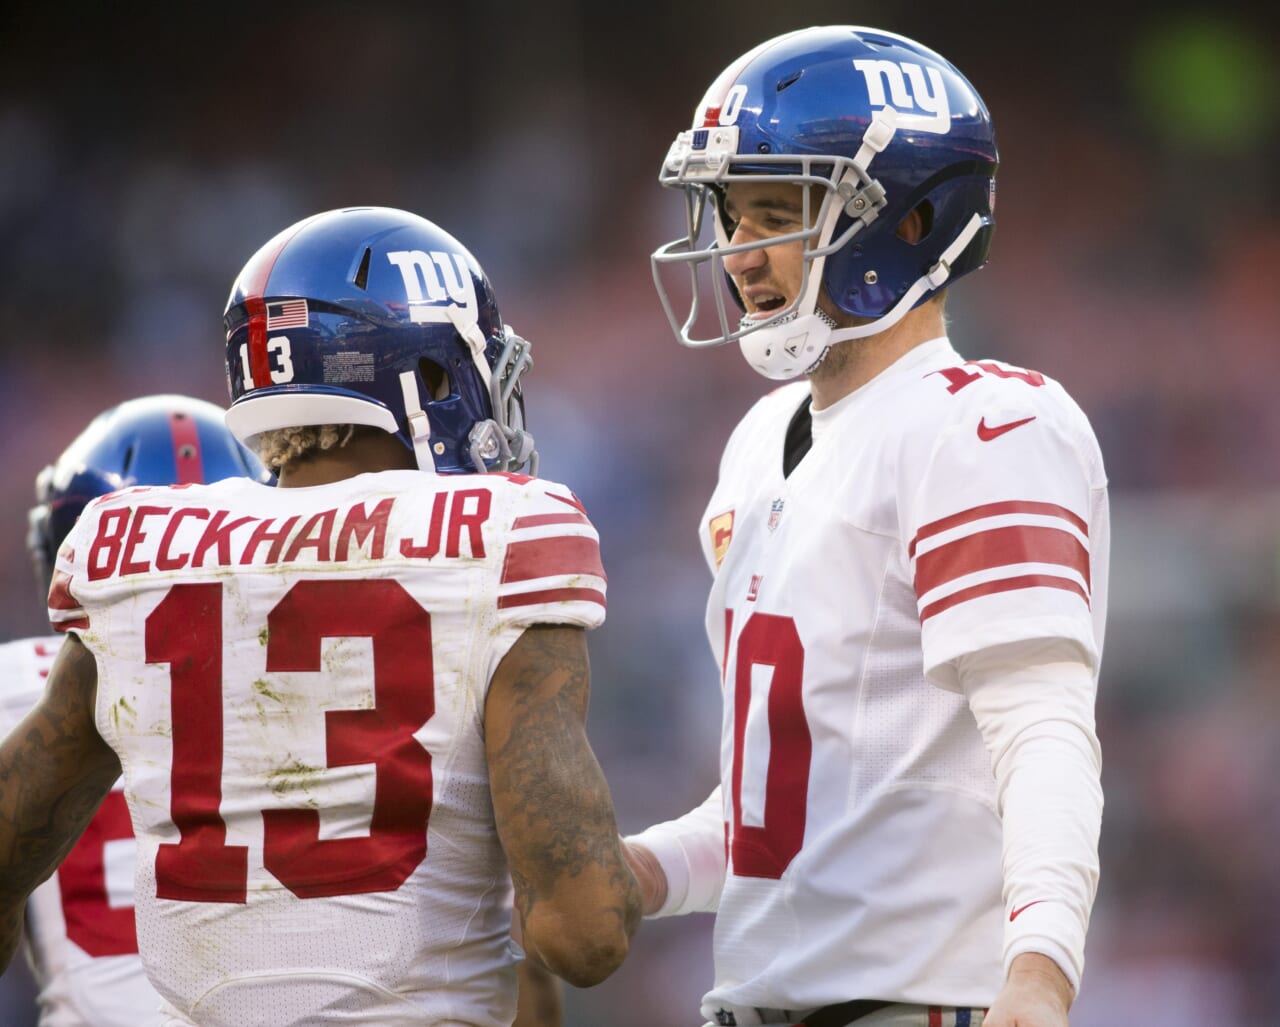 What Are The Chances The New York Giants Retain Eli Manning In 2019?